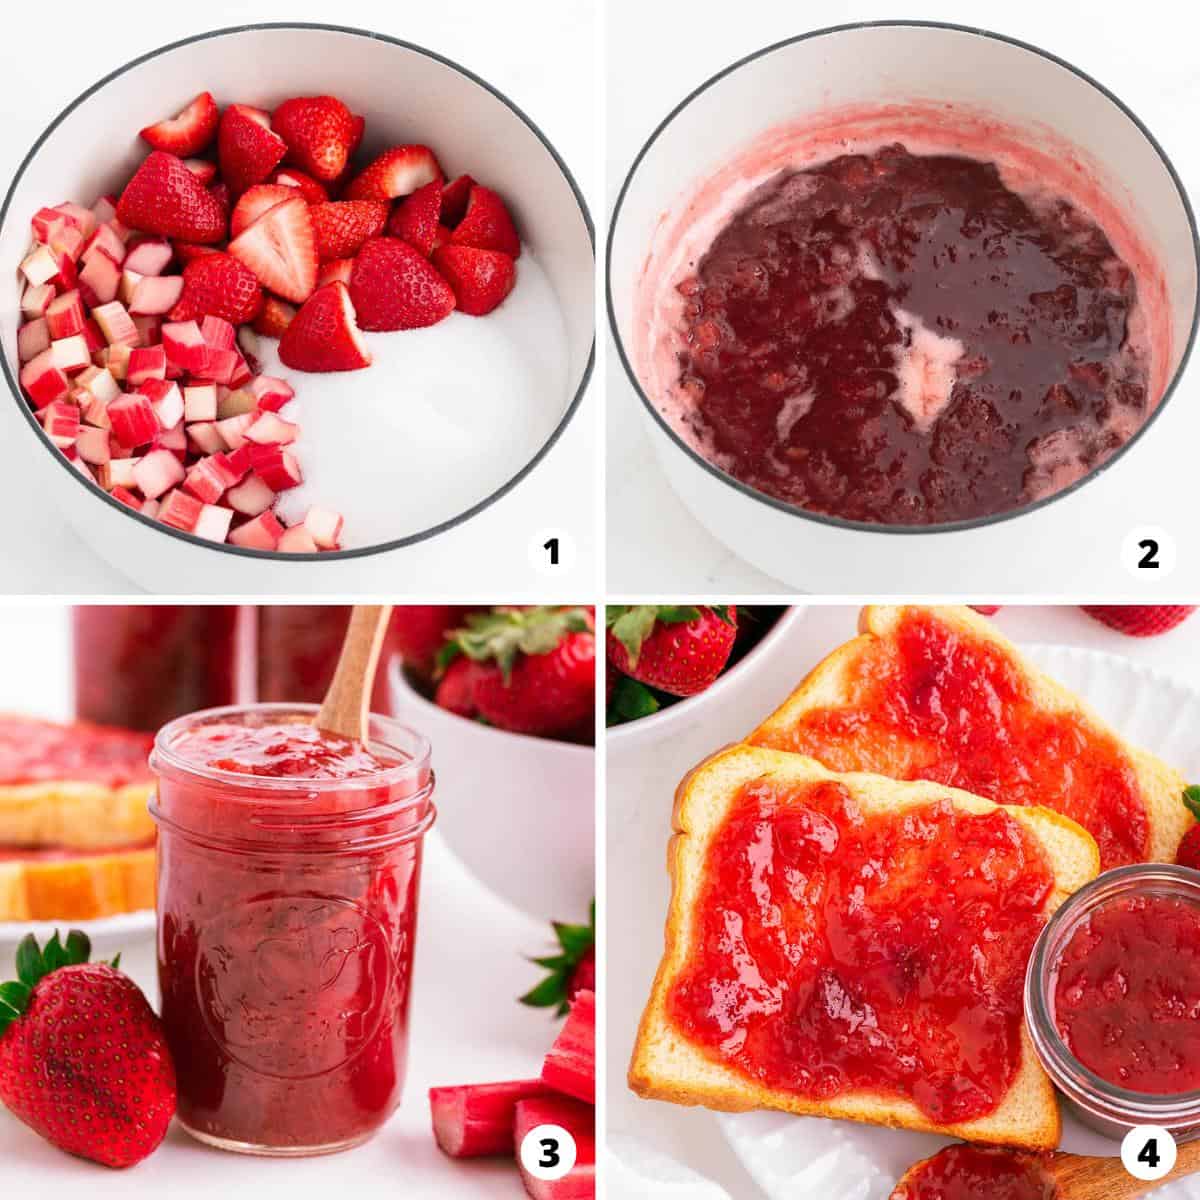 Showing how to make strawberry rhubarb jam in a 4 step collage.